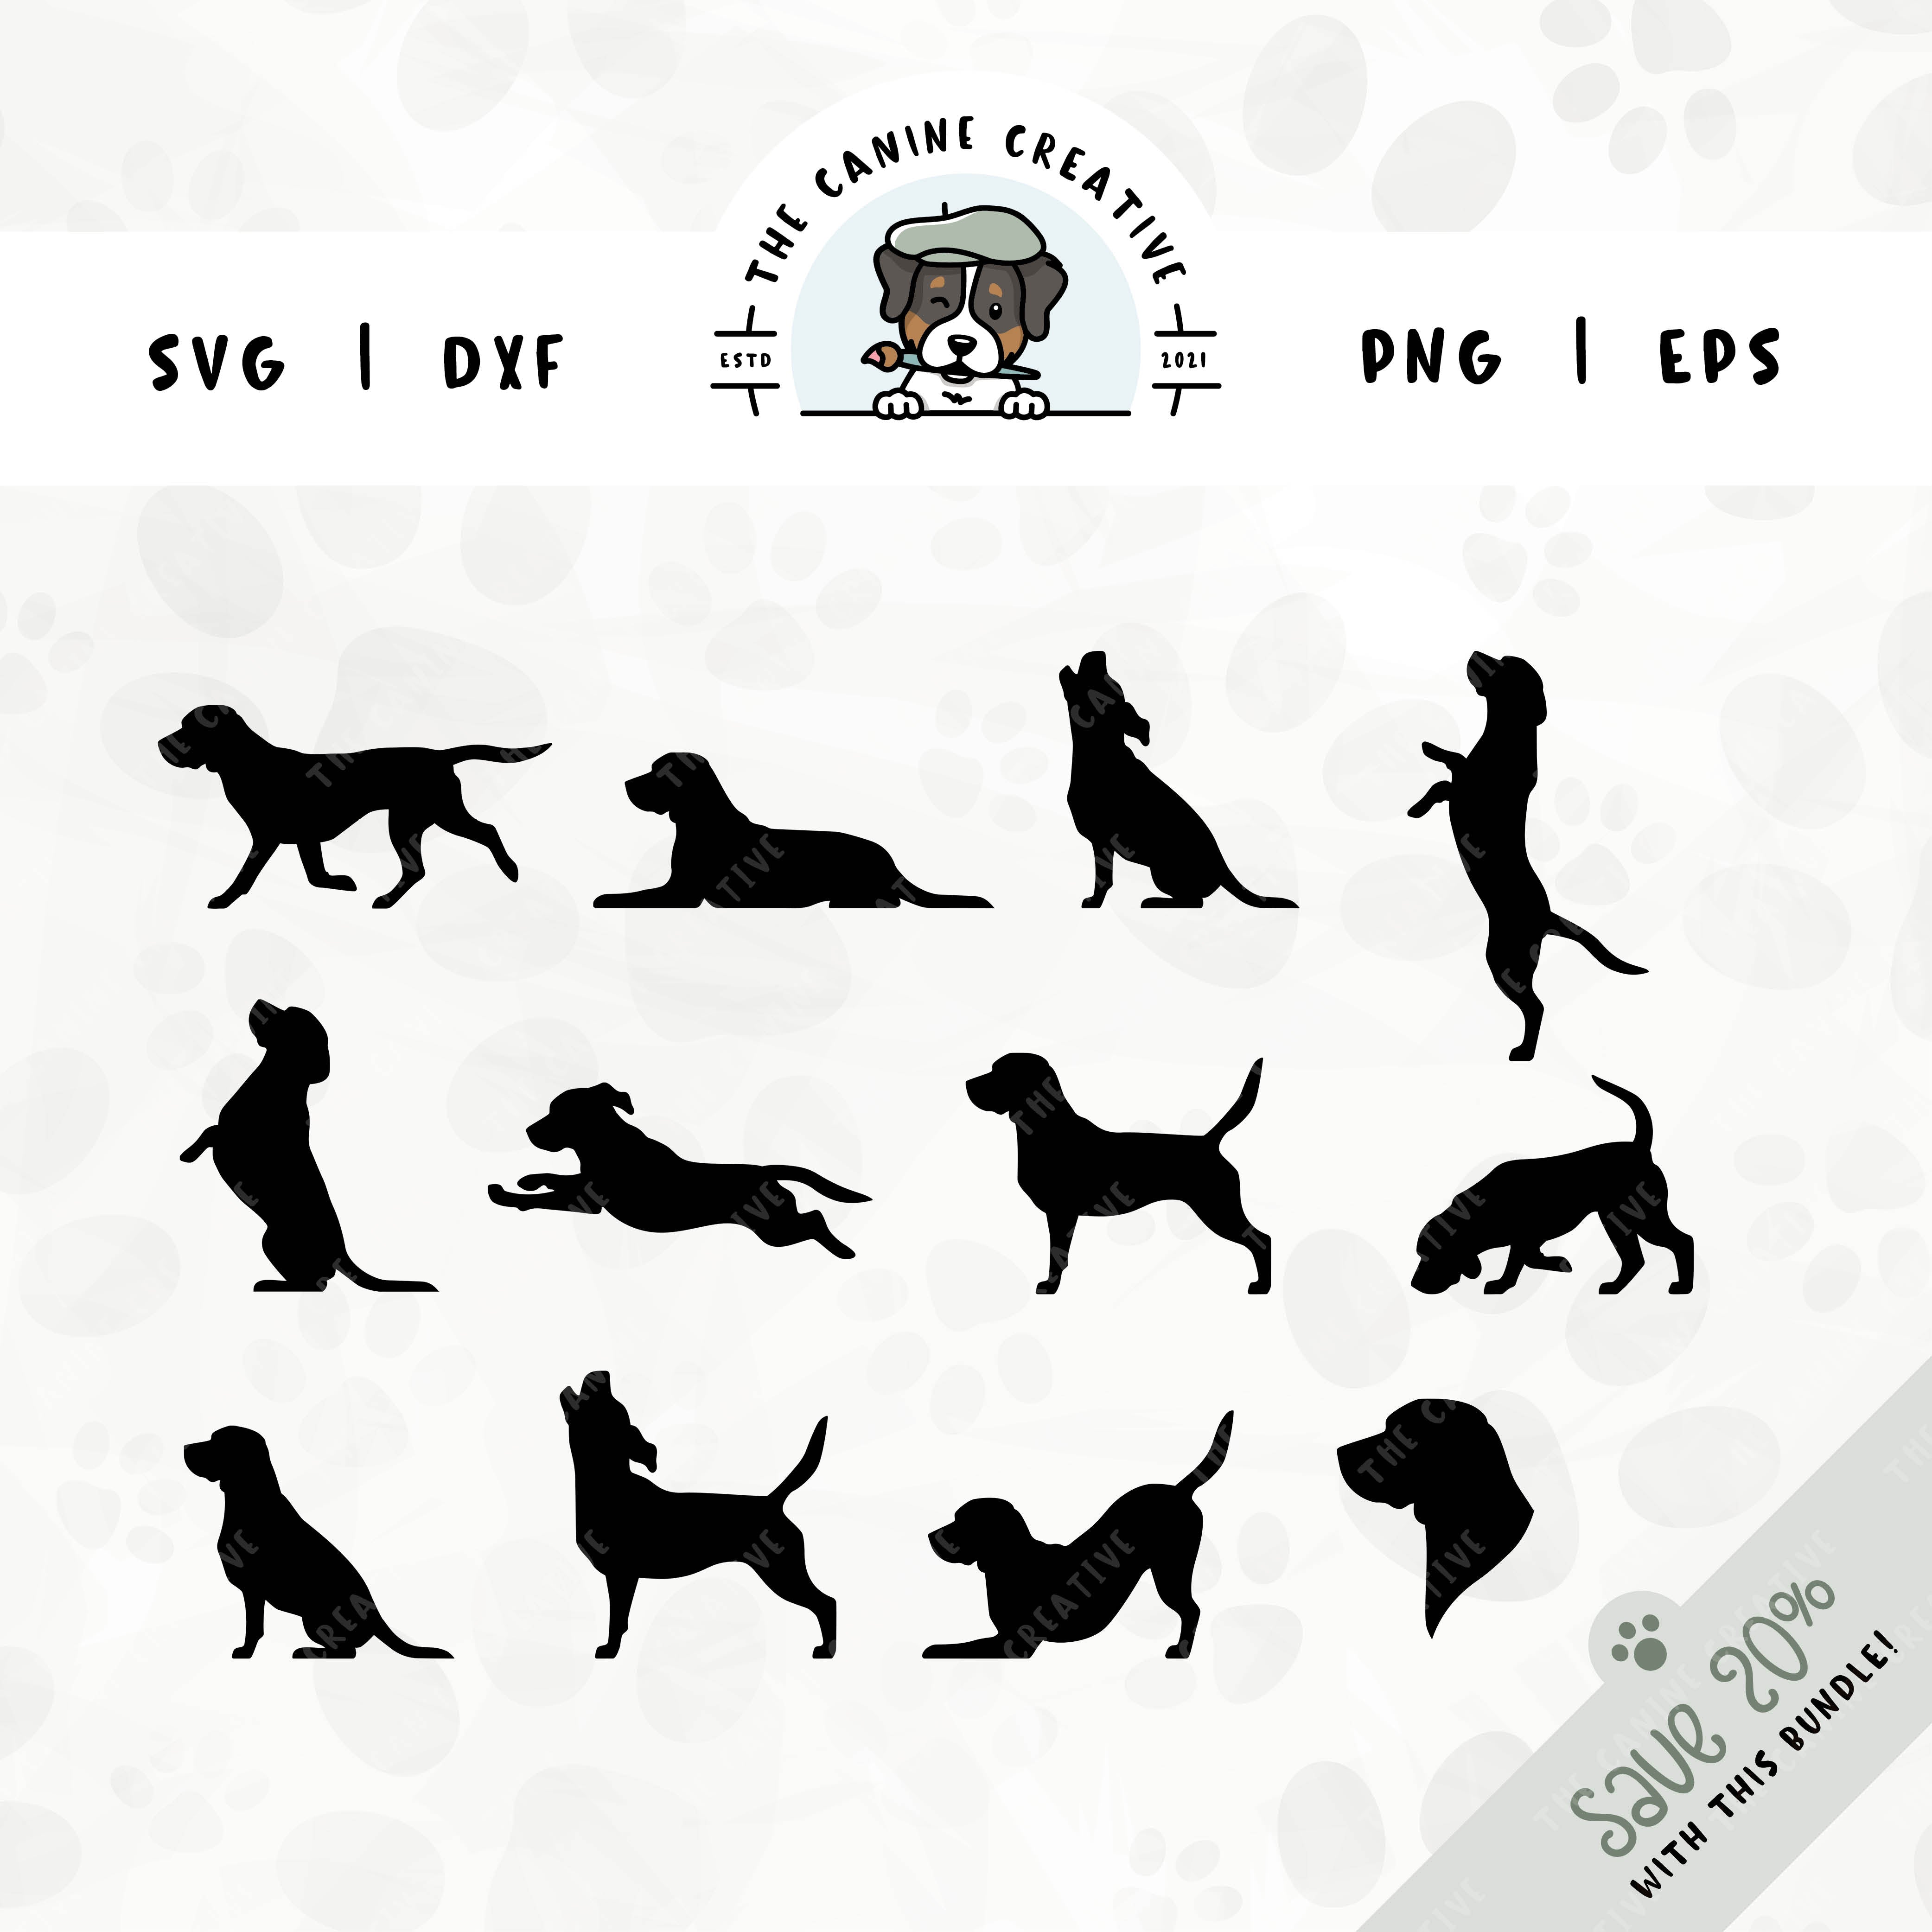 This 12-pack Beagle silhouette bundle features a dog's head in profile, along with various poses including running, laying down, playing, standing, sitting, walking, jumping up, begging, baying, howling, and sniffing. File formats include: SVG, DXF, PNG, and EPS.